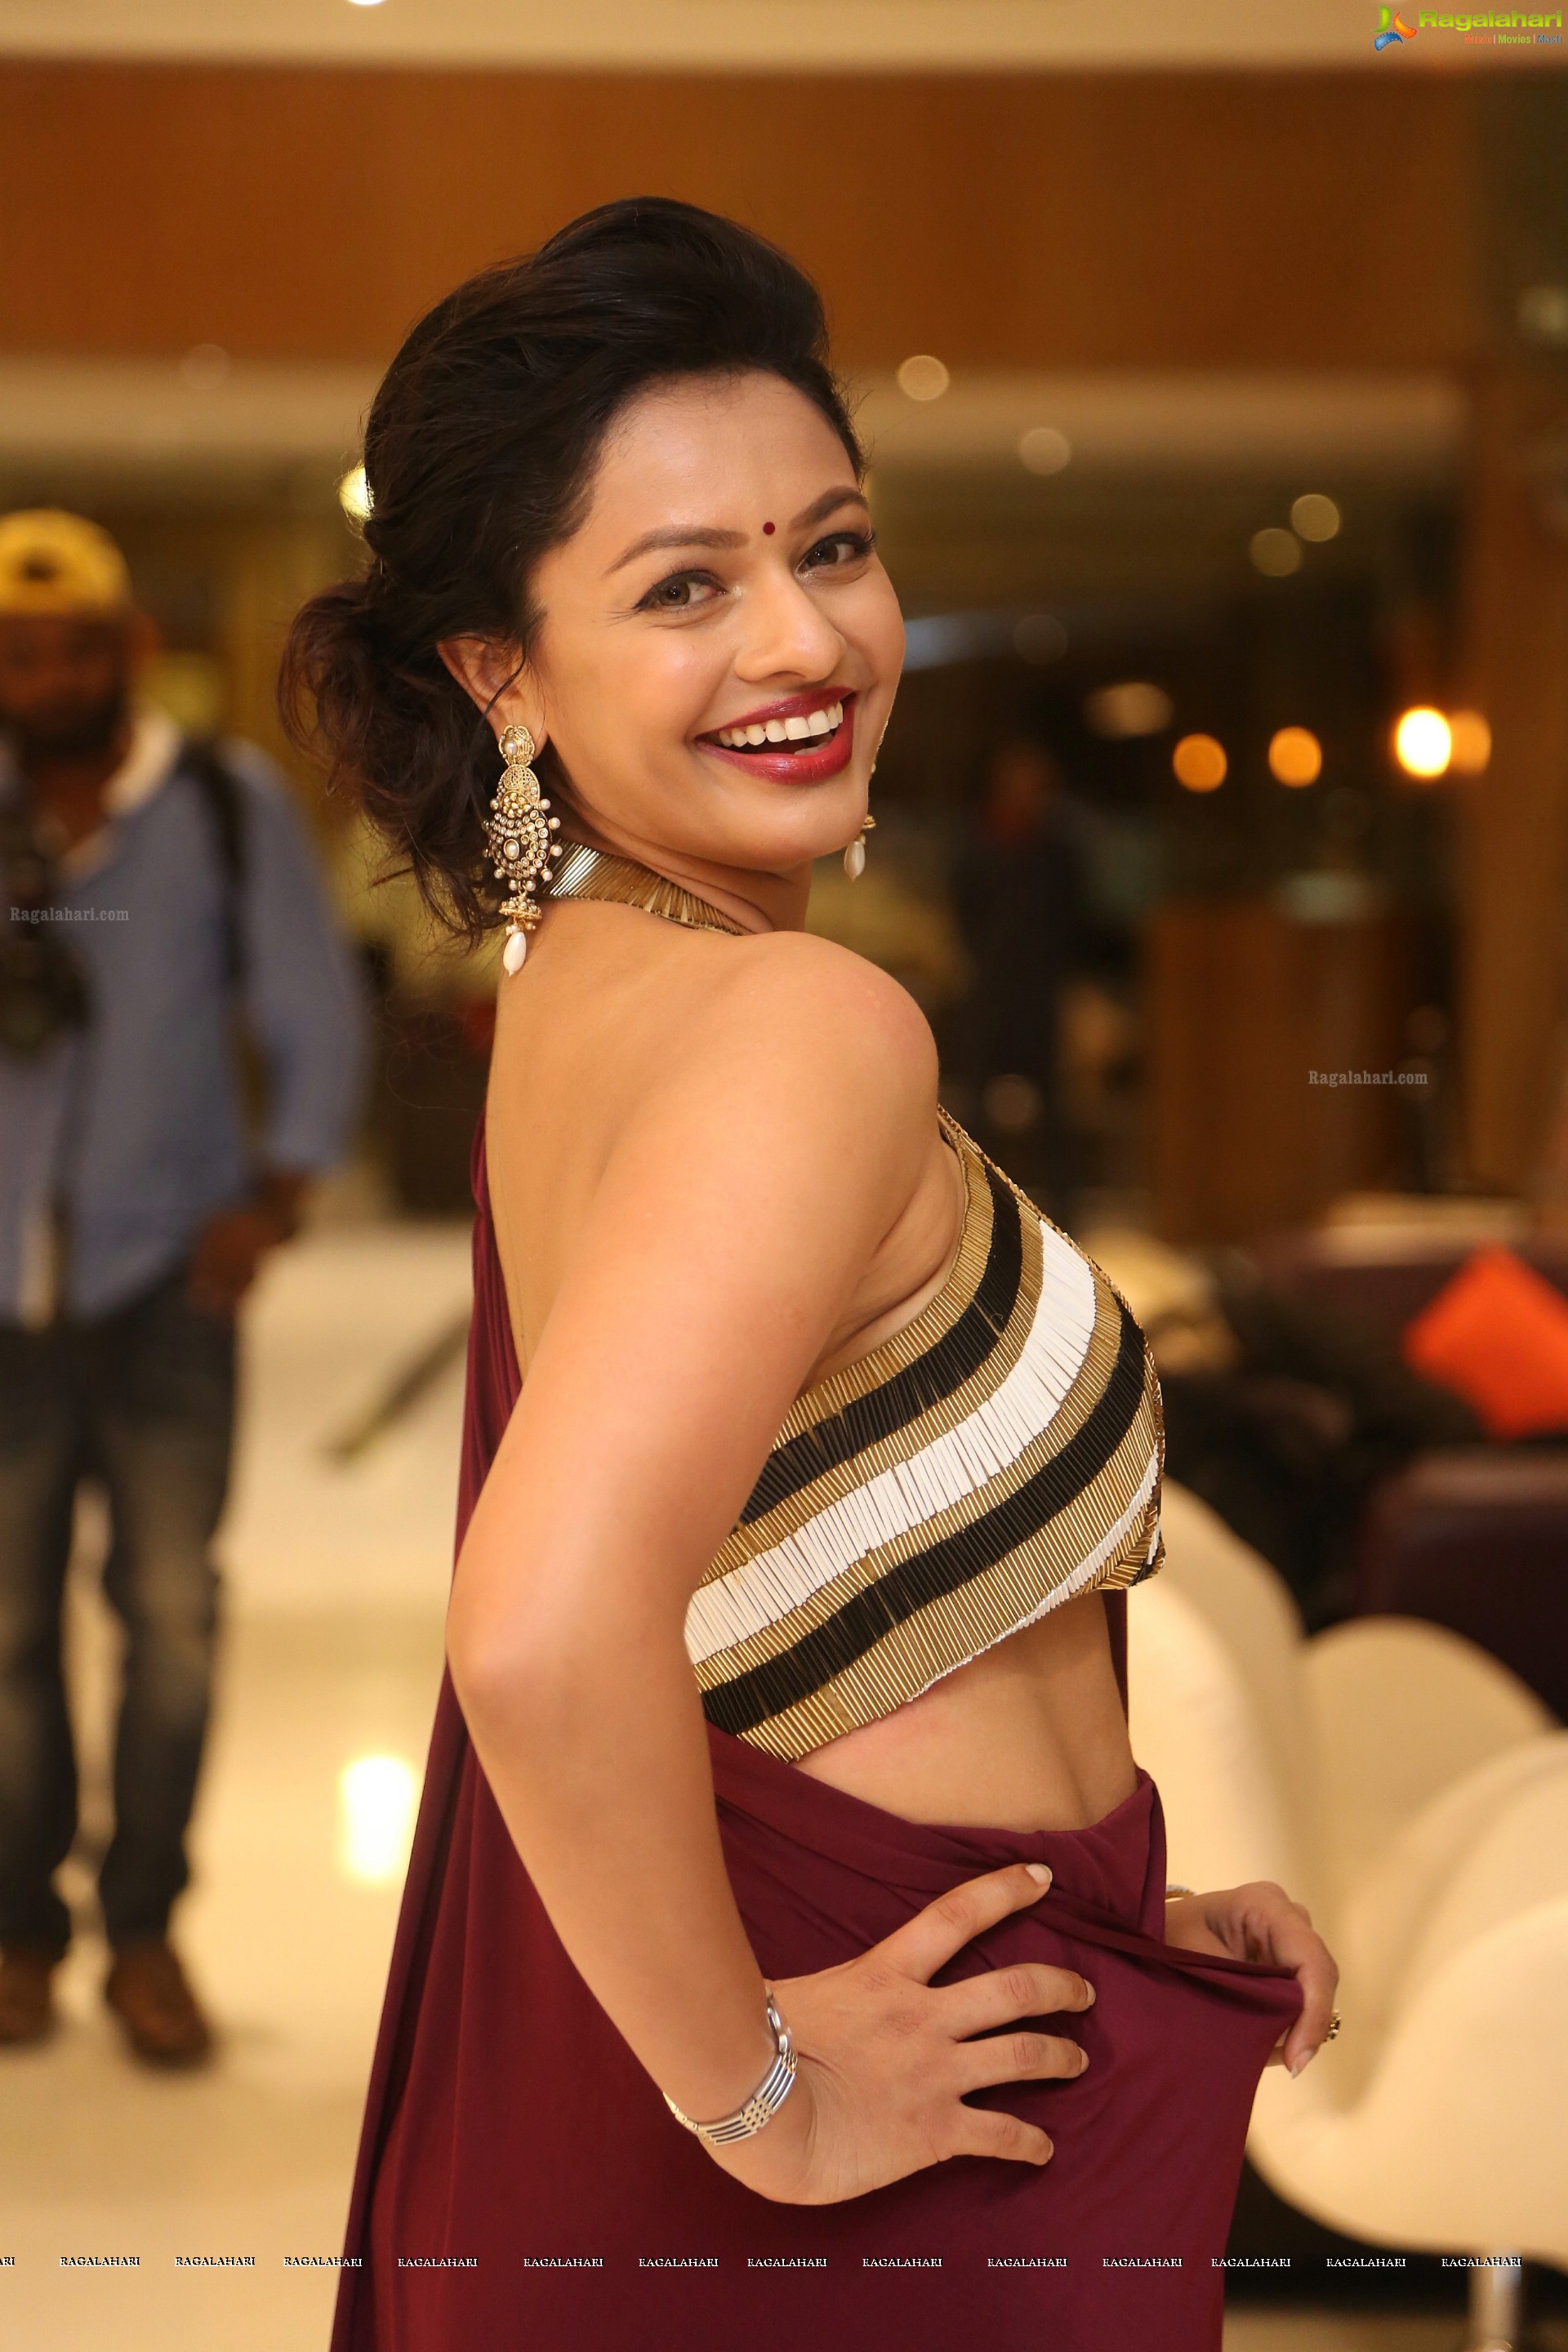 Pooja Kumar at Cake Mixing Ceremony (High Definition)